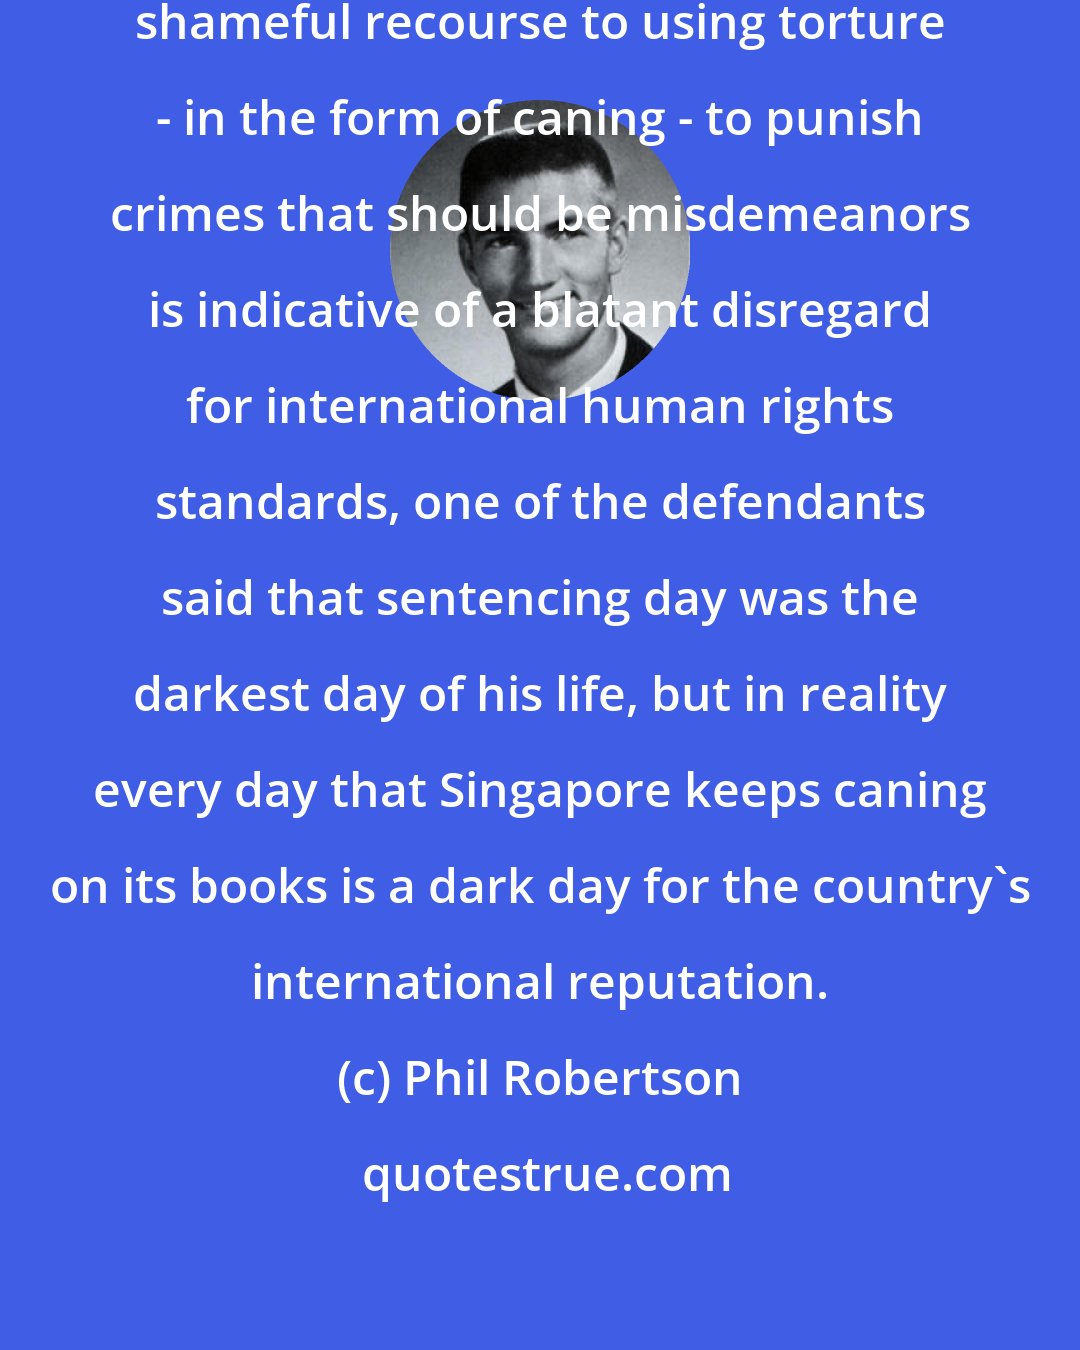 Phil Robertson: The Singapore judicial system's shameful recourse to using torture - in the form of caning - to punish crimes that should be misdemeanors is indicative of a blatant disregard for international human rights standards, one of the defendants said that sentencing day was the darkest day of his life, but in reality every day that Singapore keeps caning on its books is a dark day for the country's international reputation.